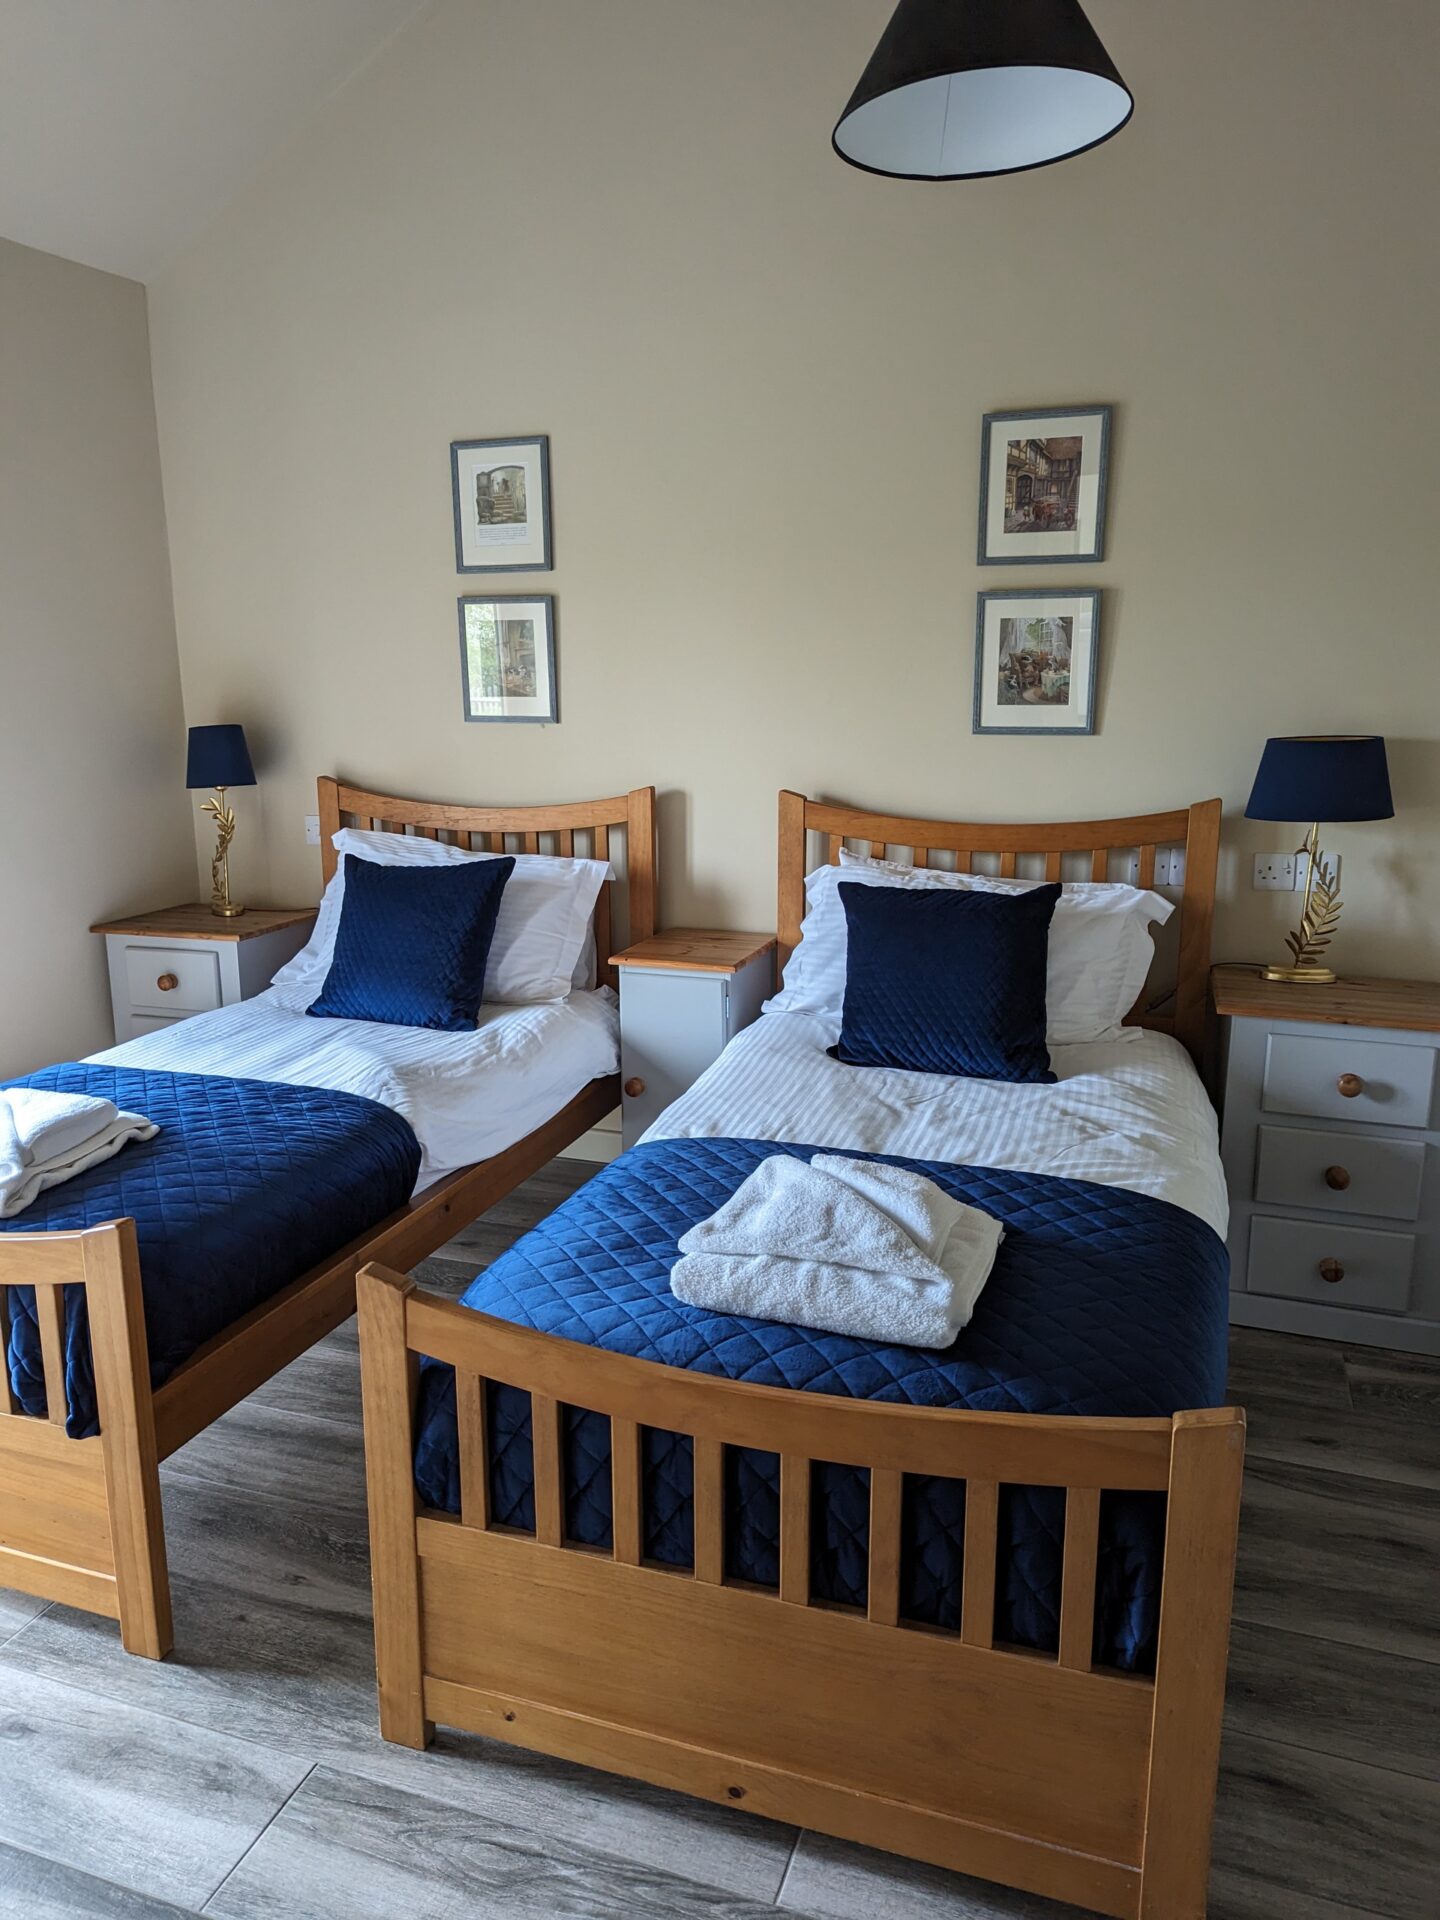 suffolk holiday cottage twin beds